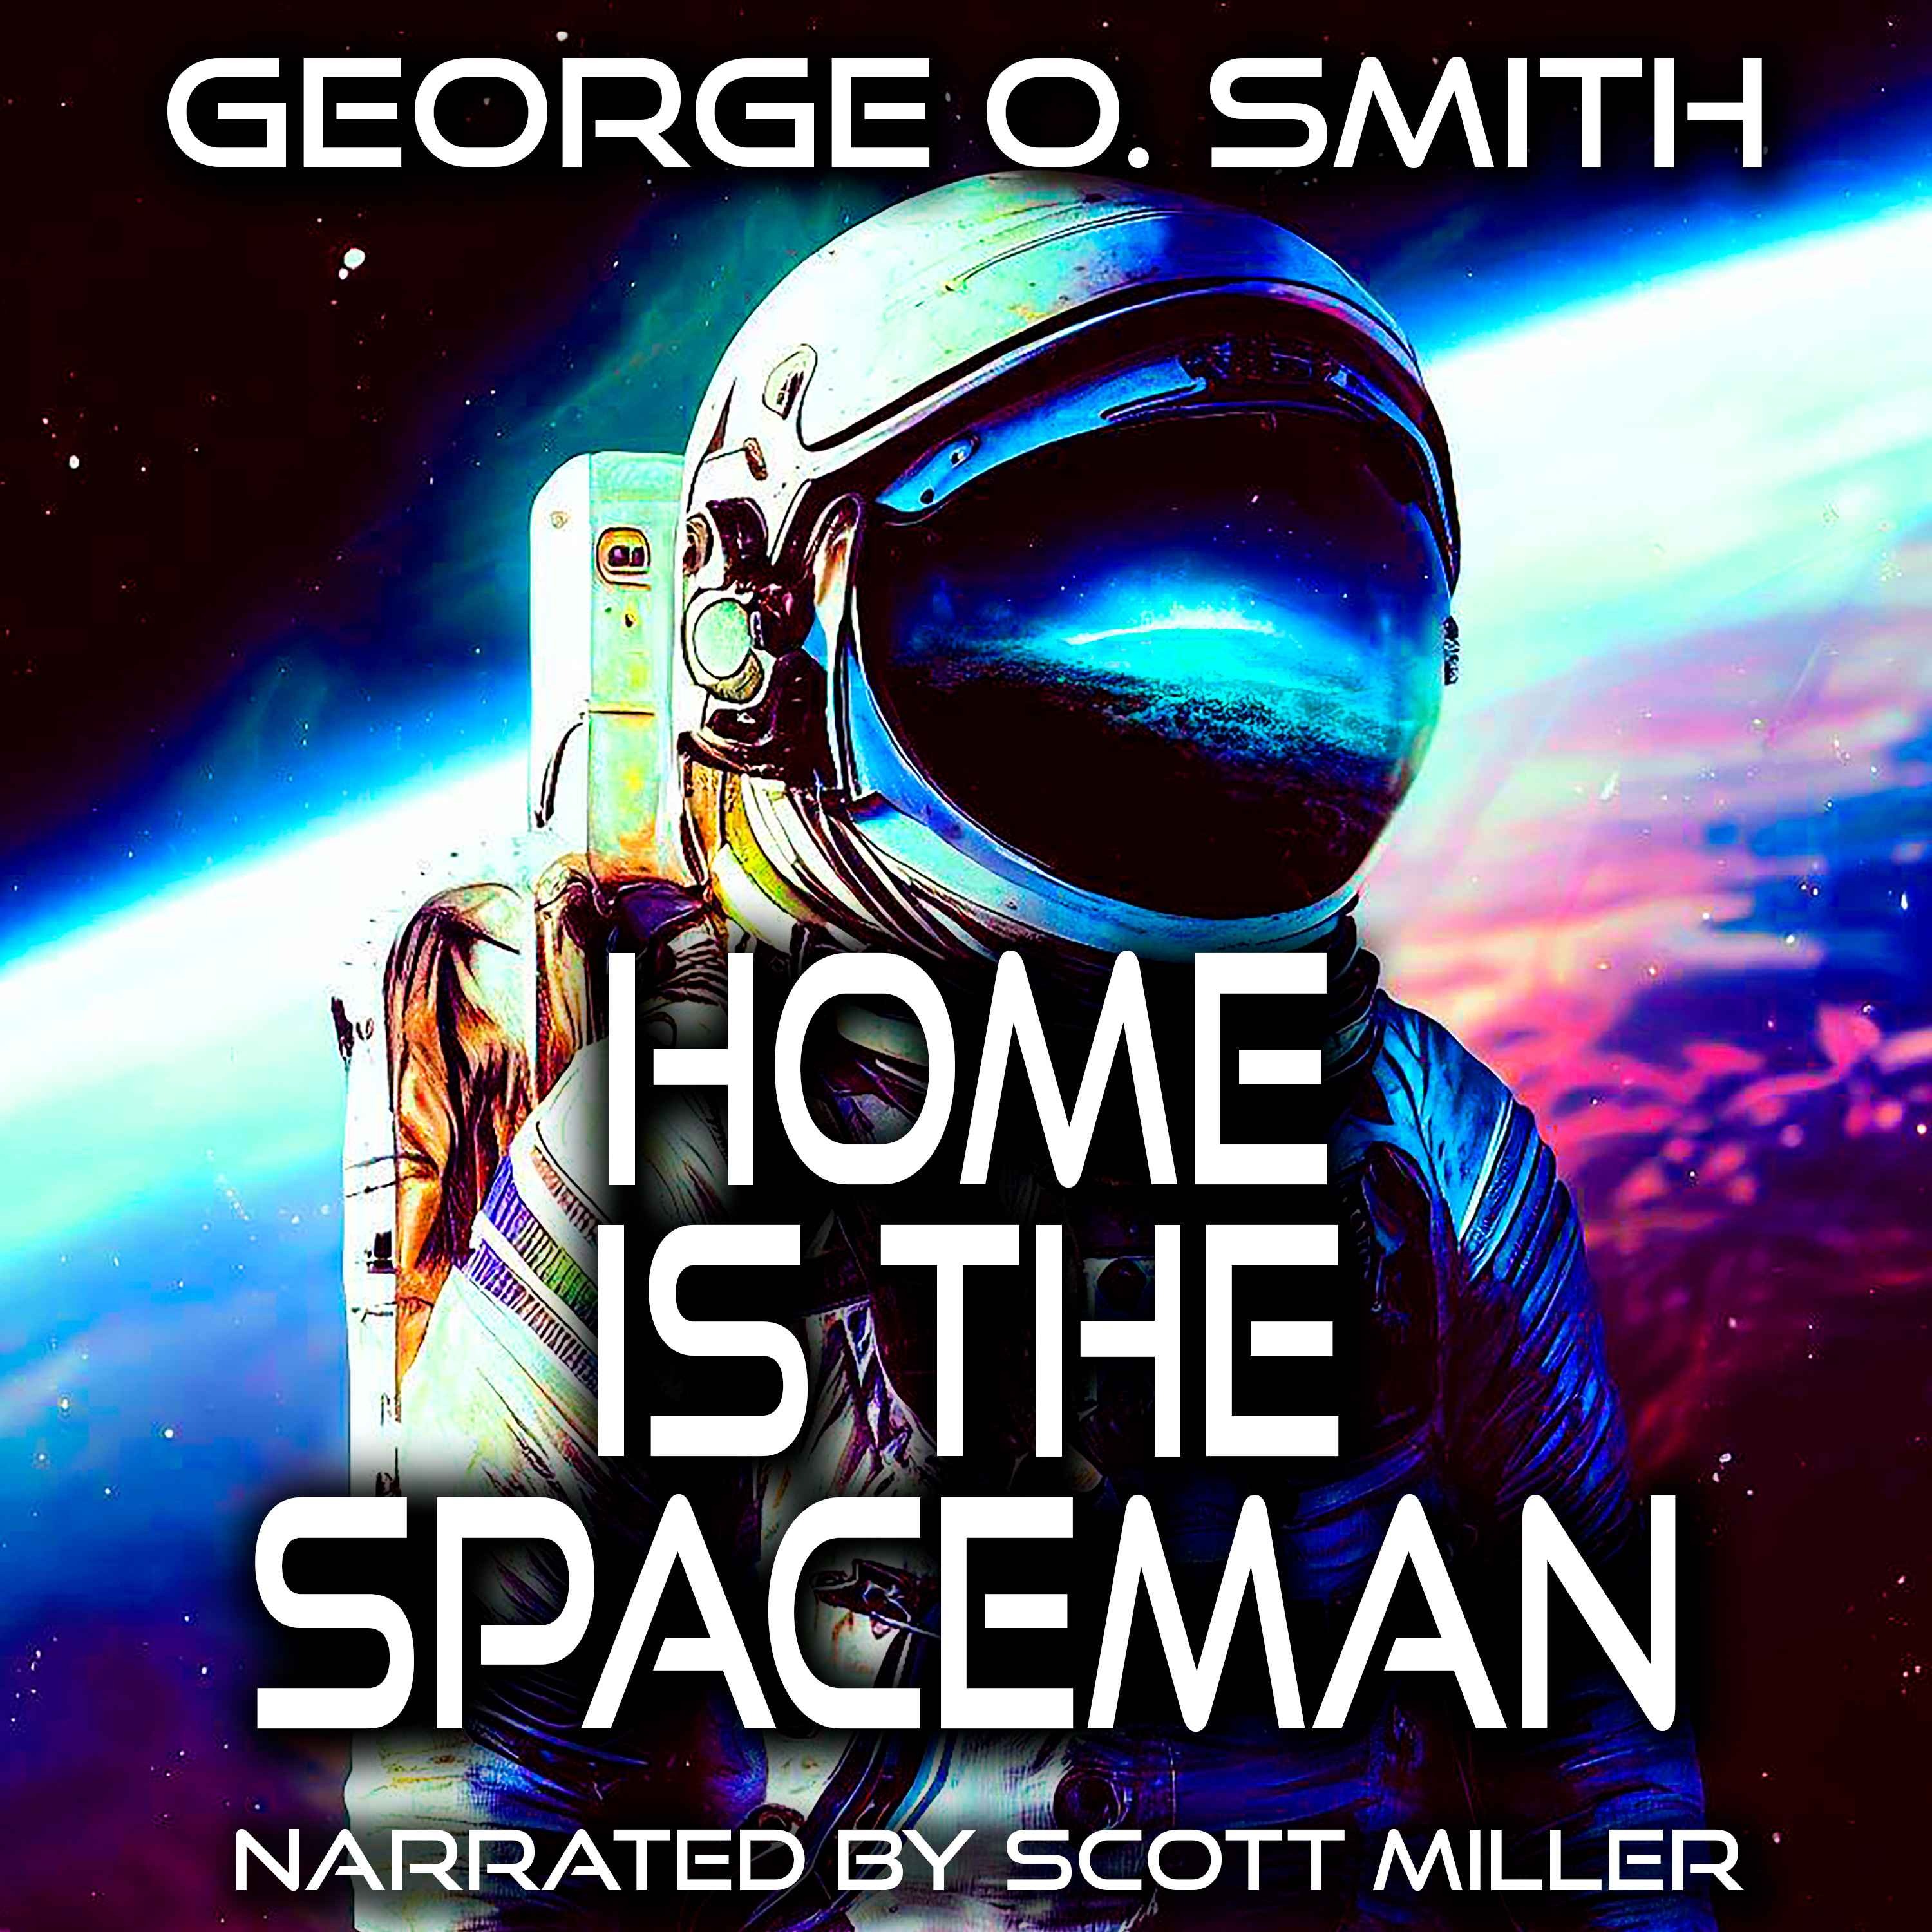 Home is the Spaceman by George O. Smith - Space Travel Science Fiction